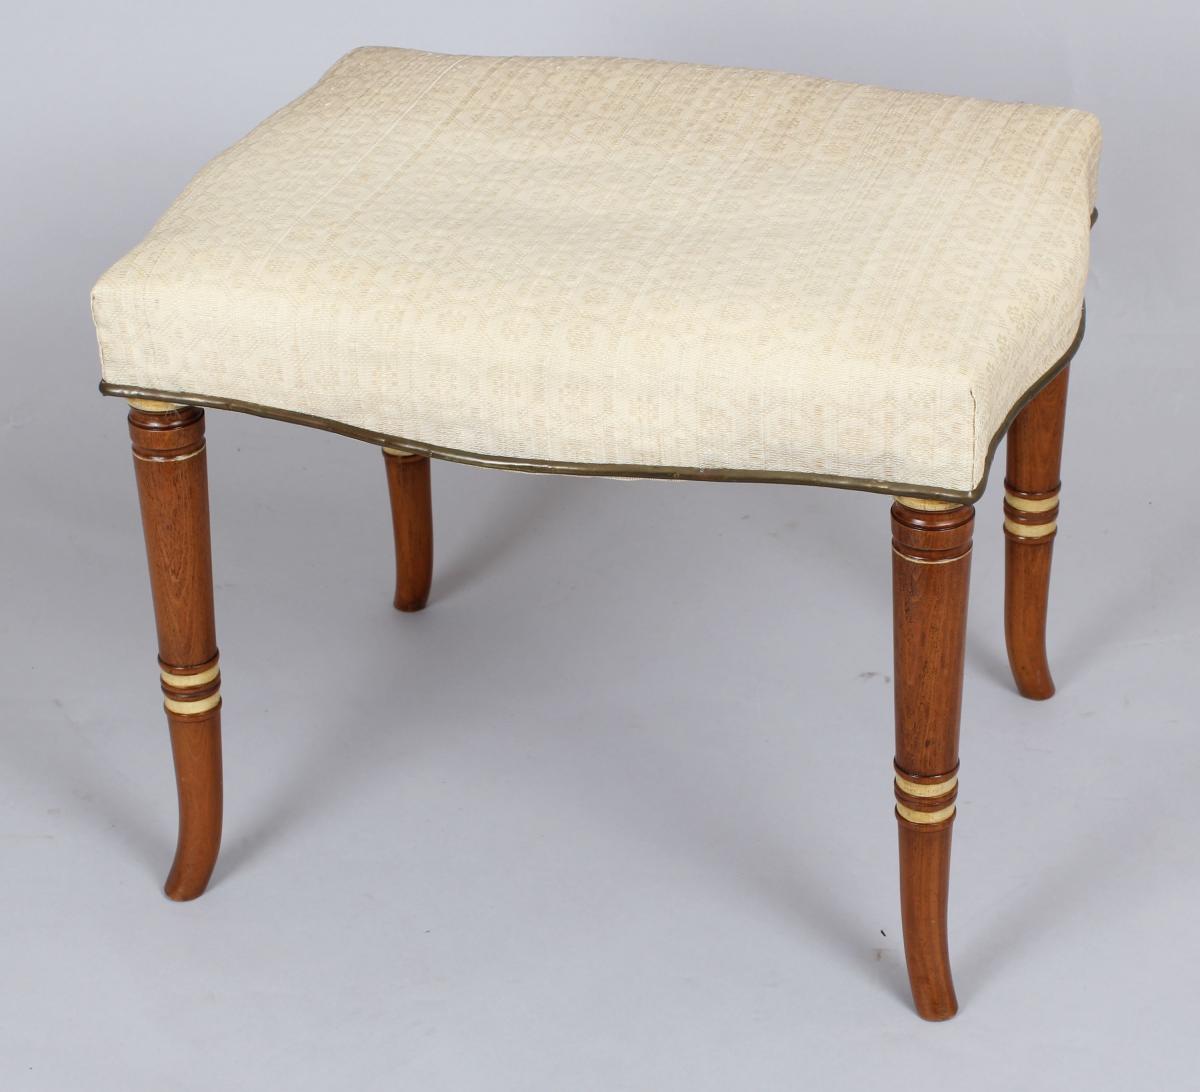 Pair of early nineteenth century Continental stools